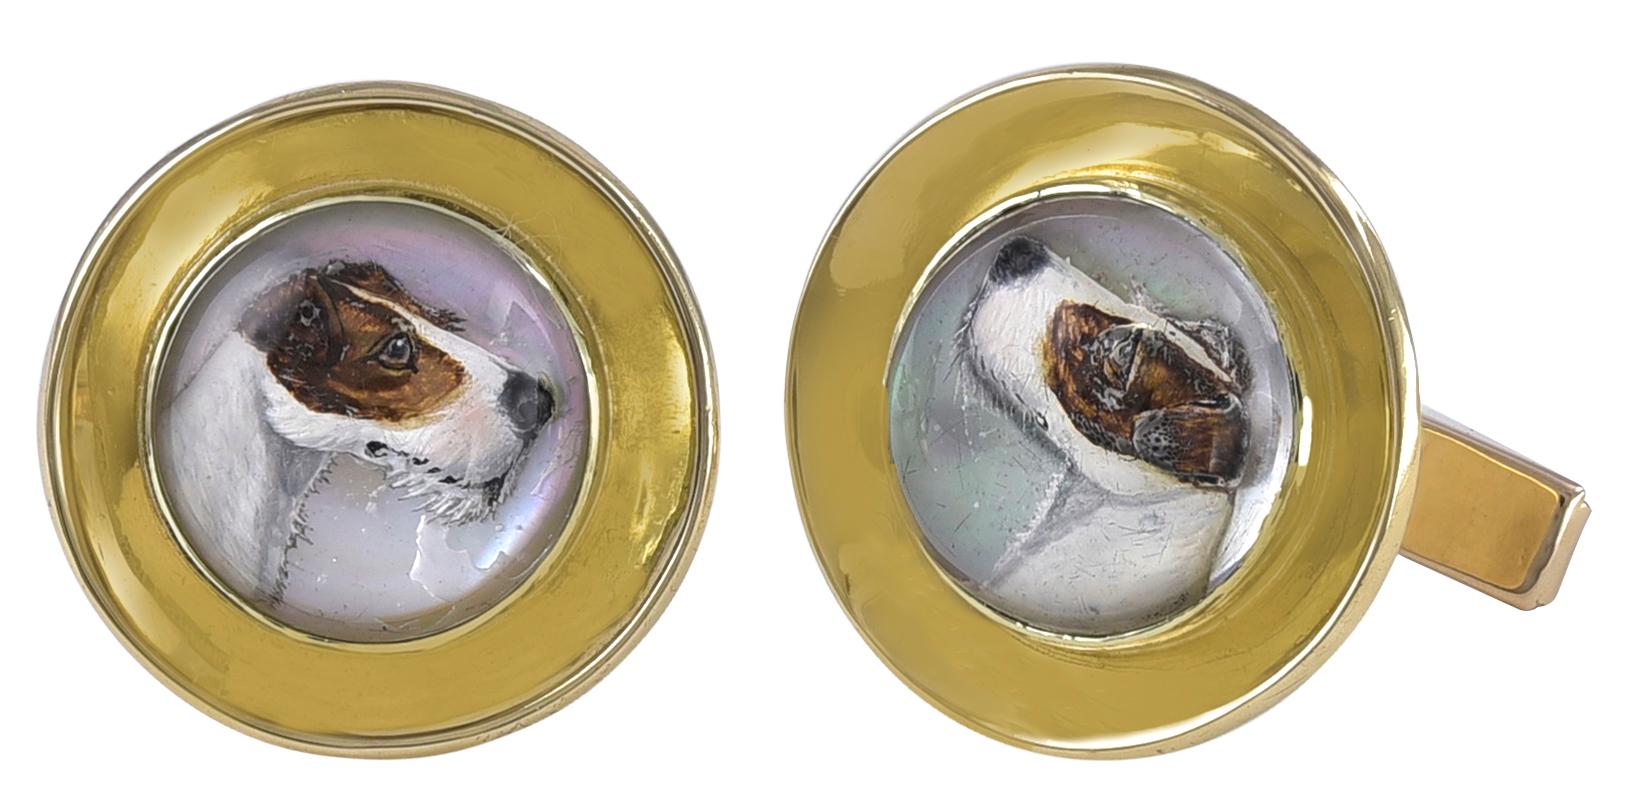 Large round cufflinks.  14K yellow gold, set with an Essex Crystal image of a terrier.  7/8